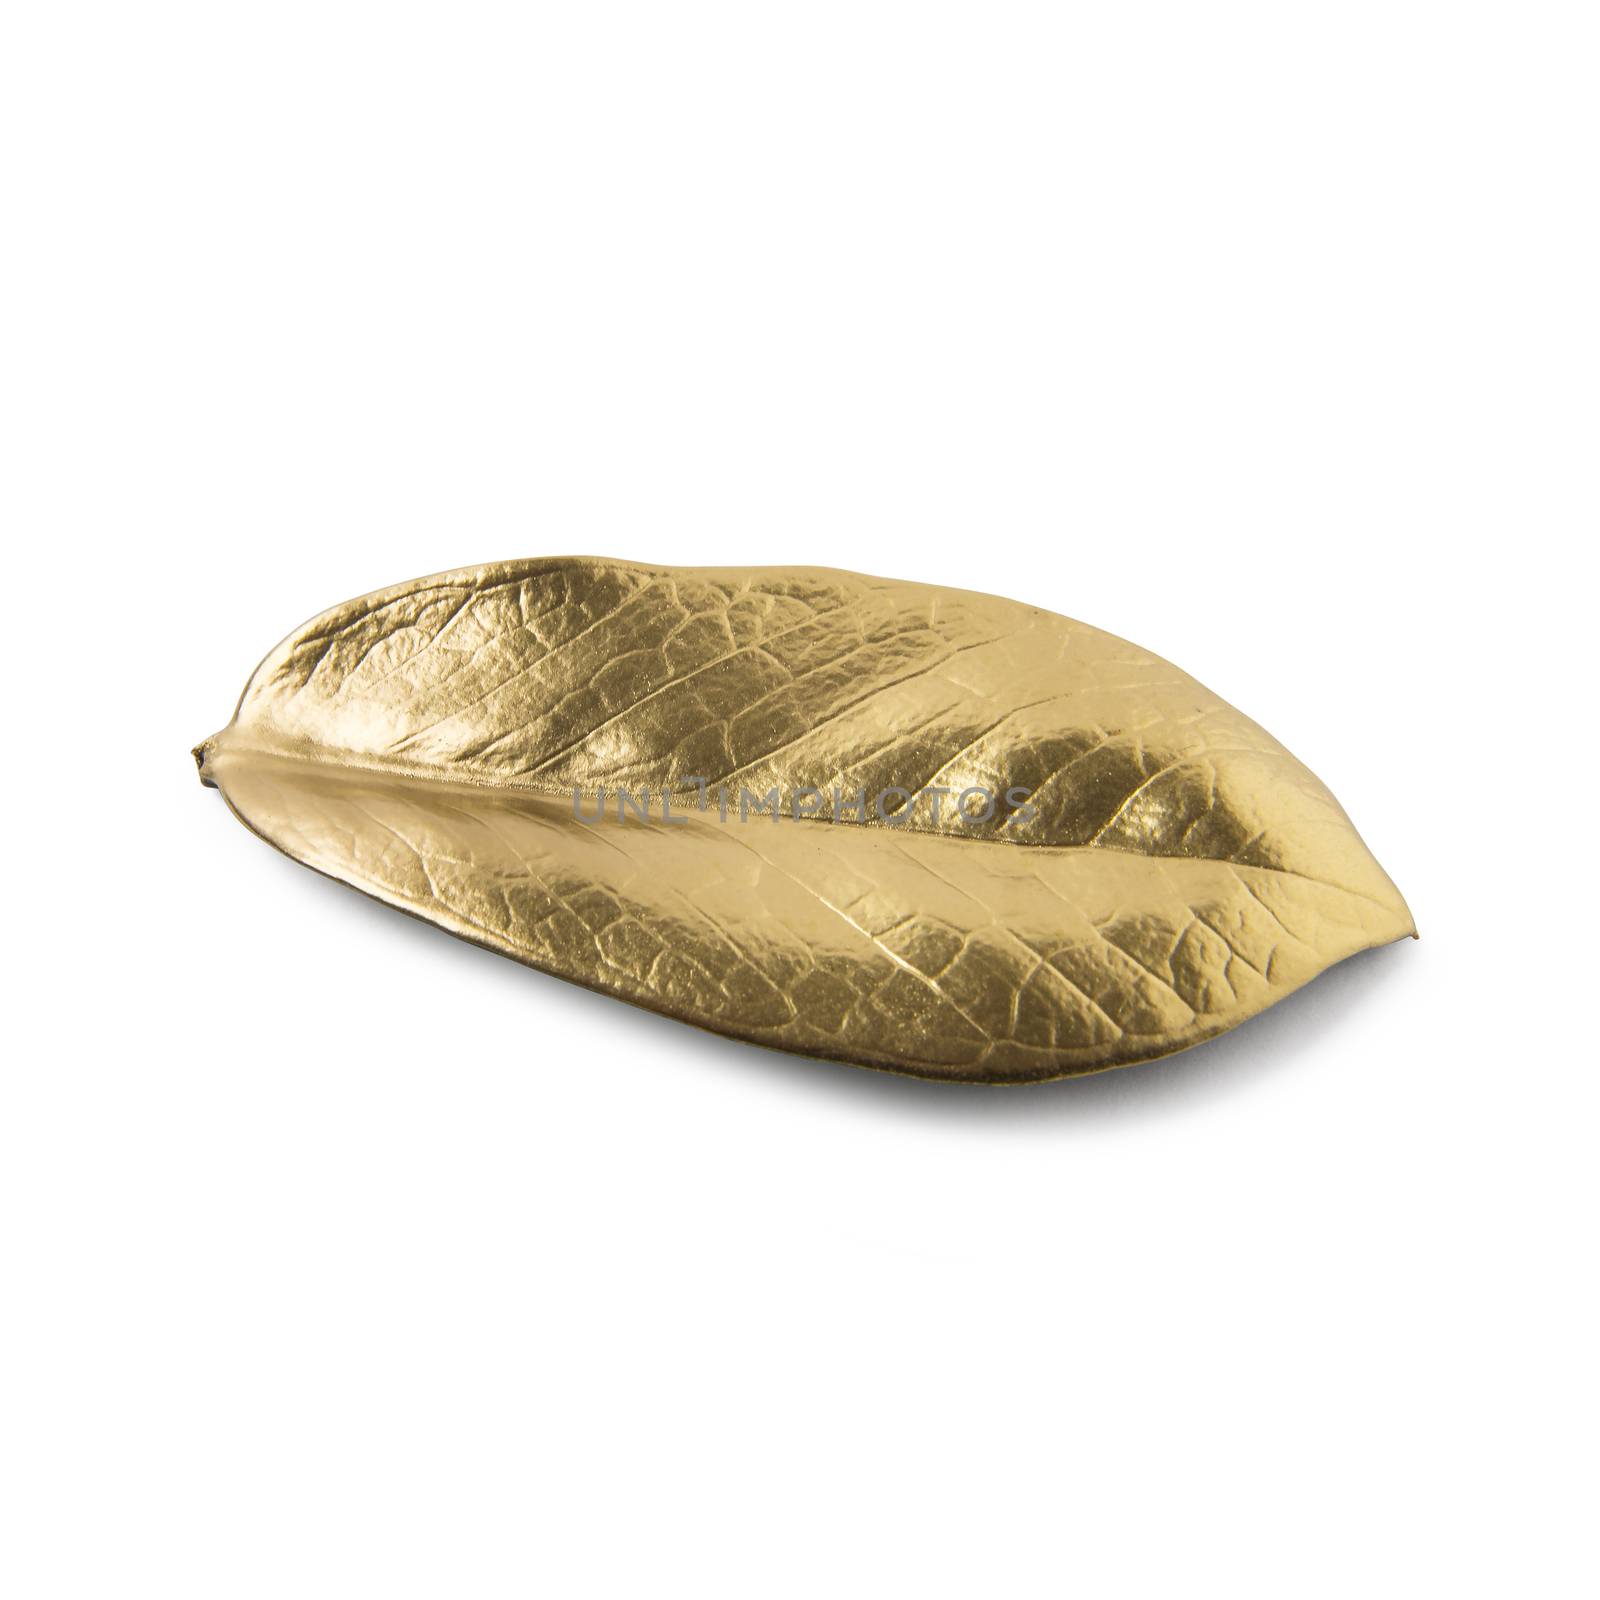 Gold leaf on white background by butenkow